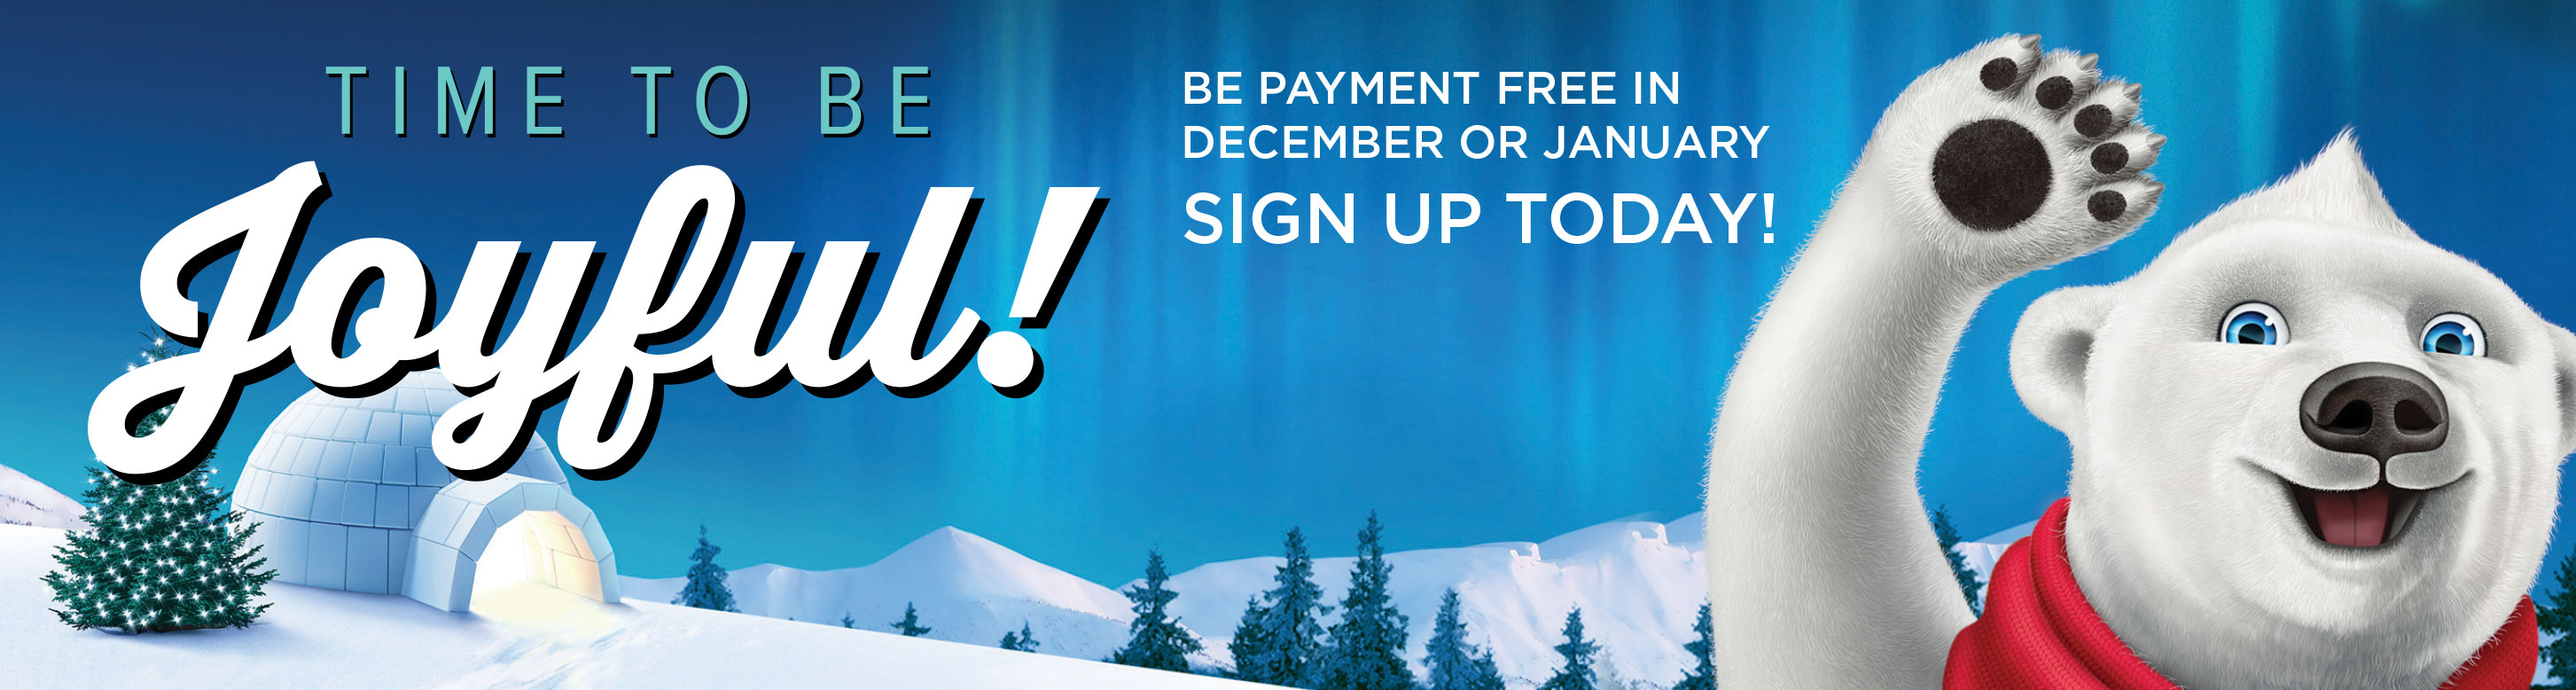 Time to be joyful! Be payment free in December or January sign up today!